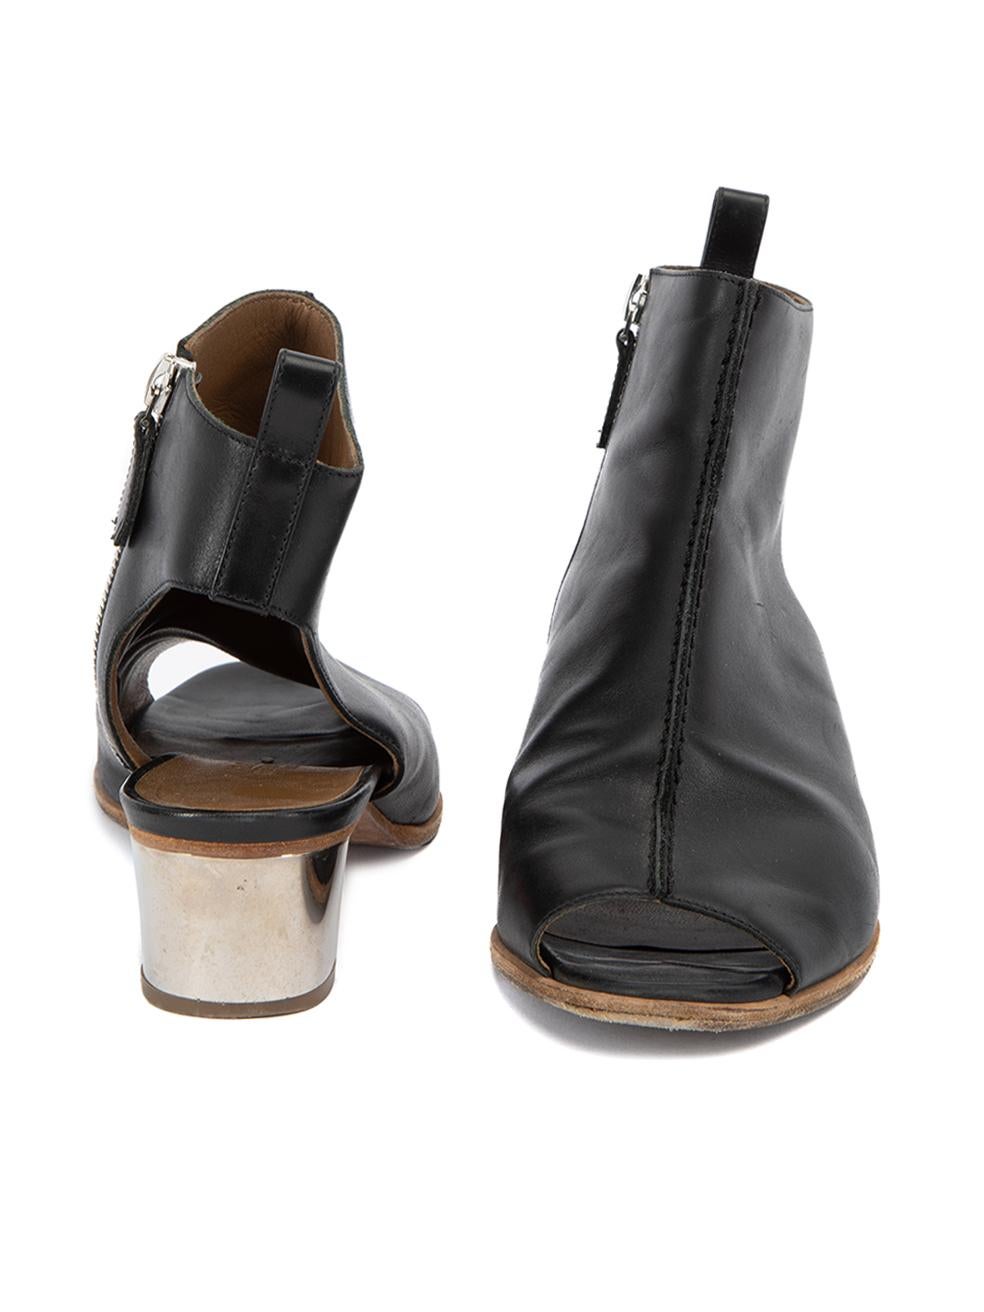 Hermès Women's Black Leather Peep Toe Booties In Good Condition For Sale In London, GB